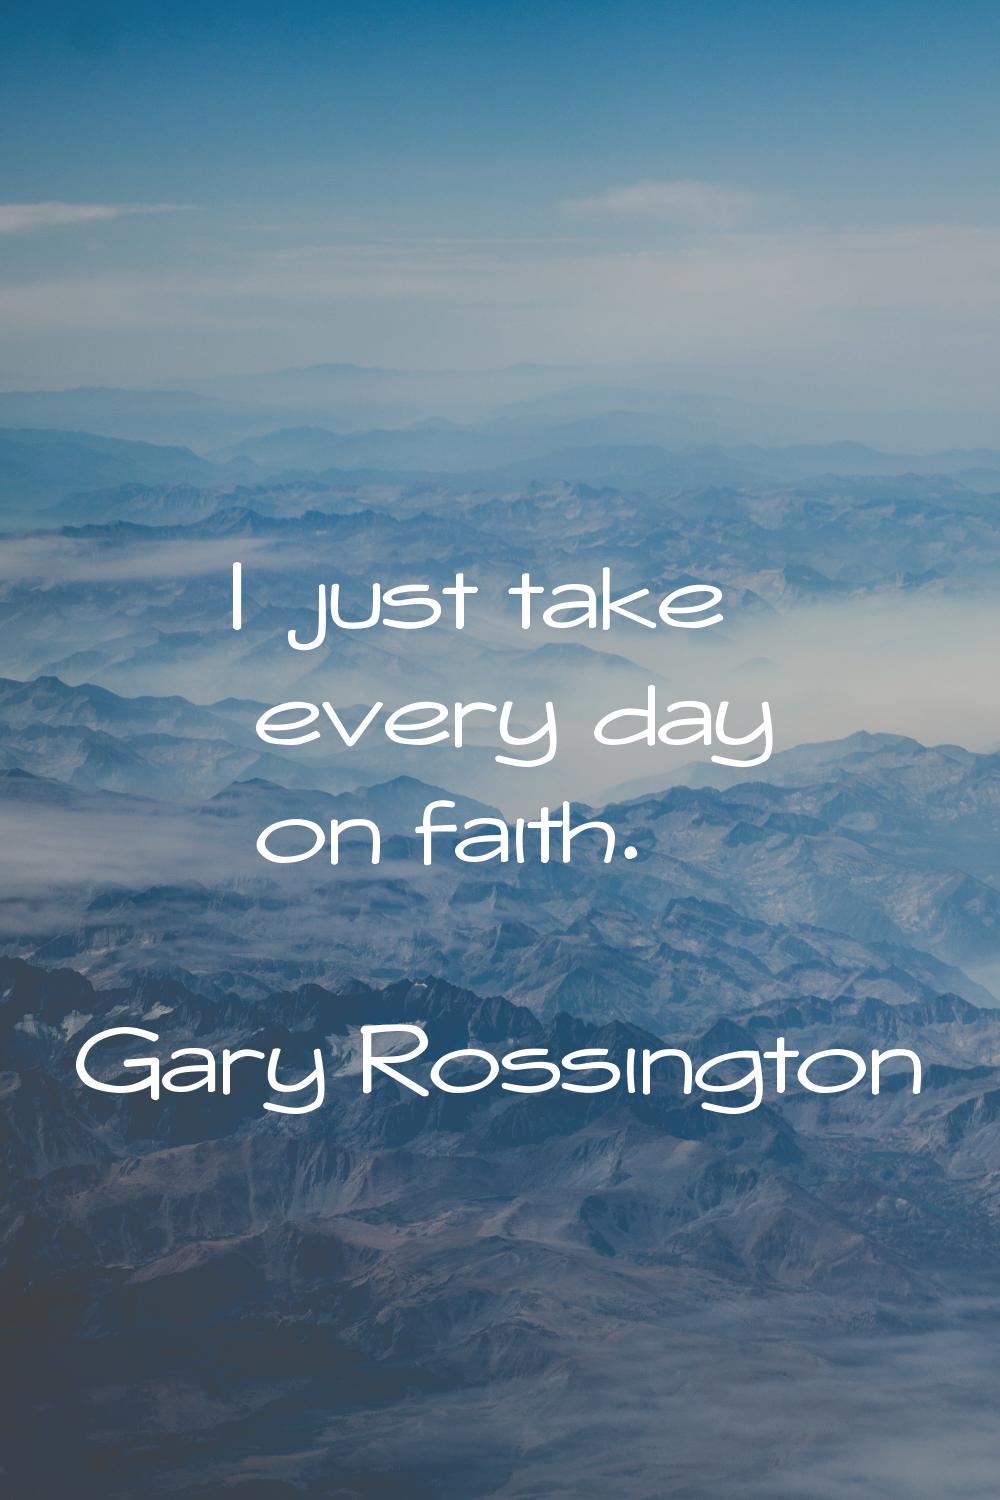 I just take every day on faith.